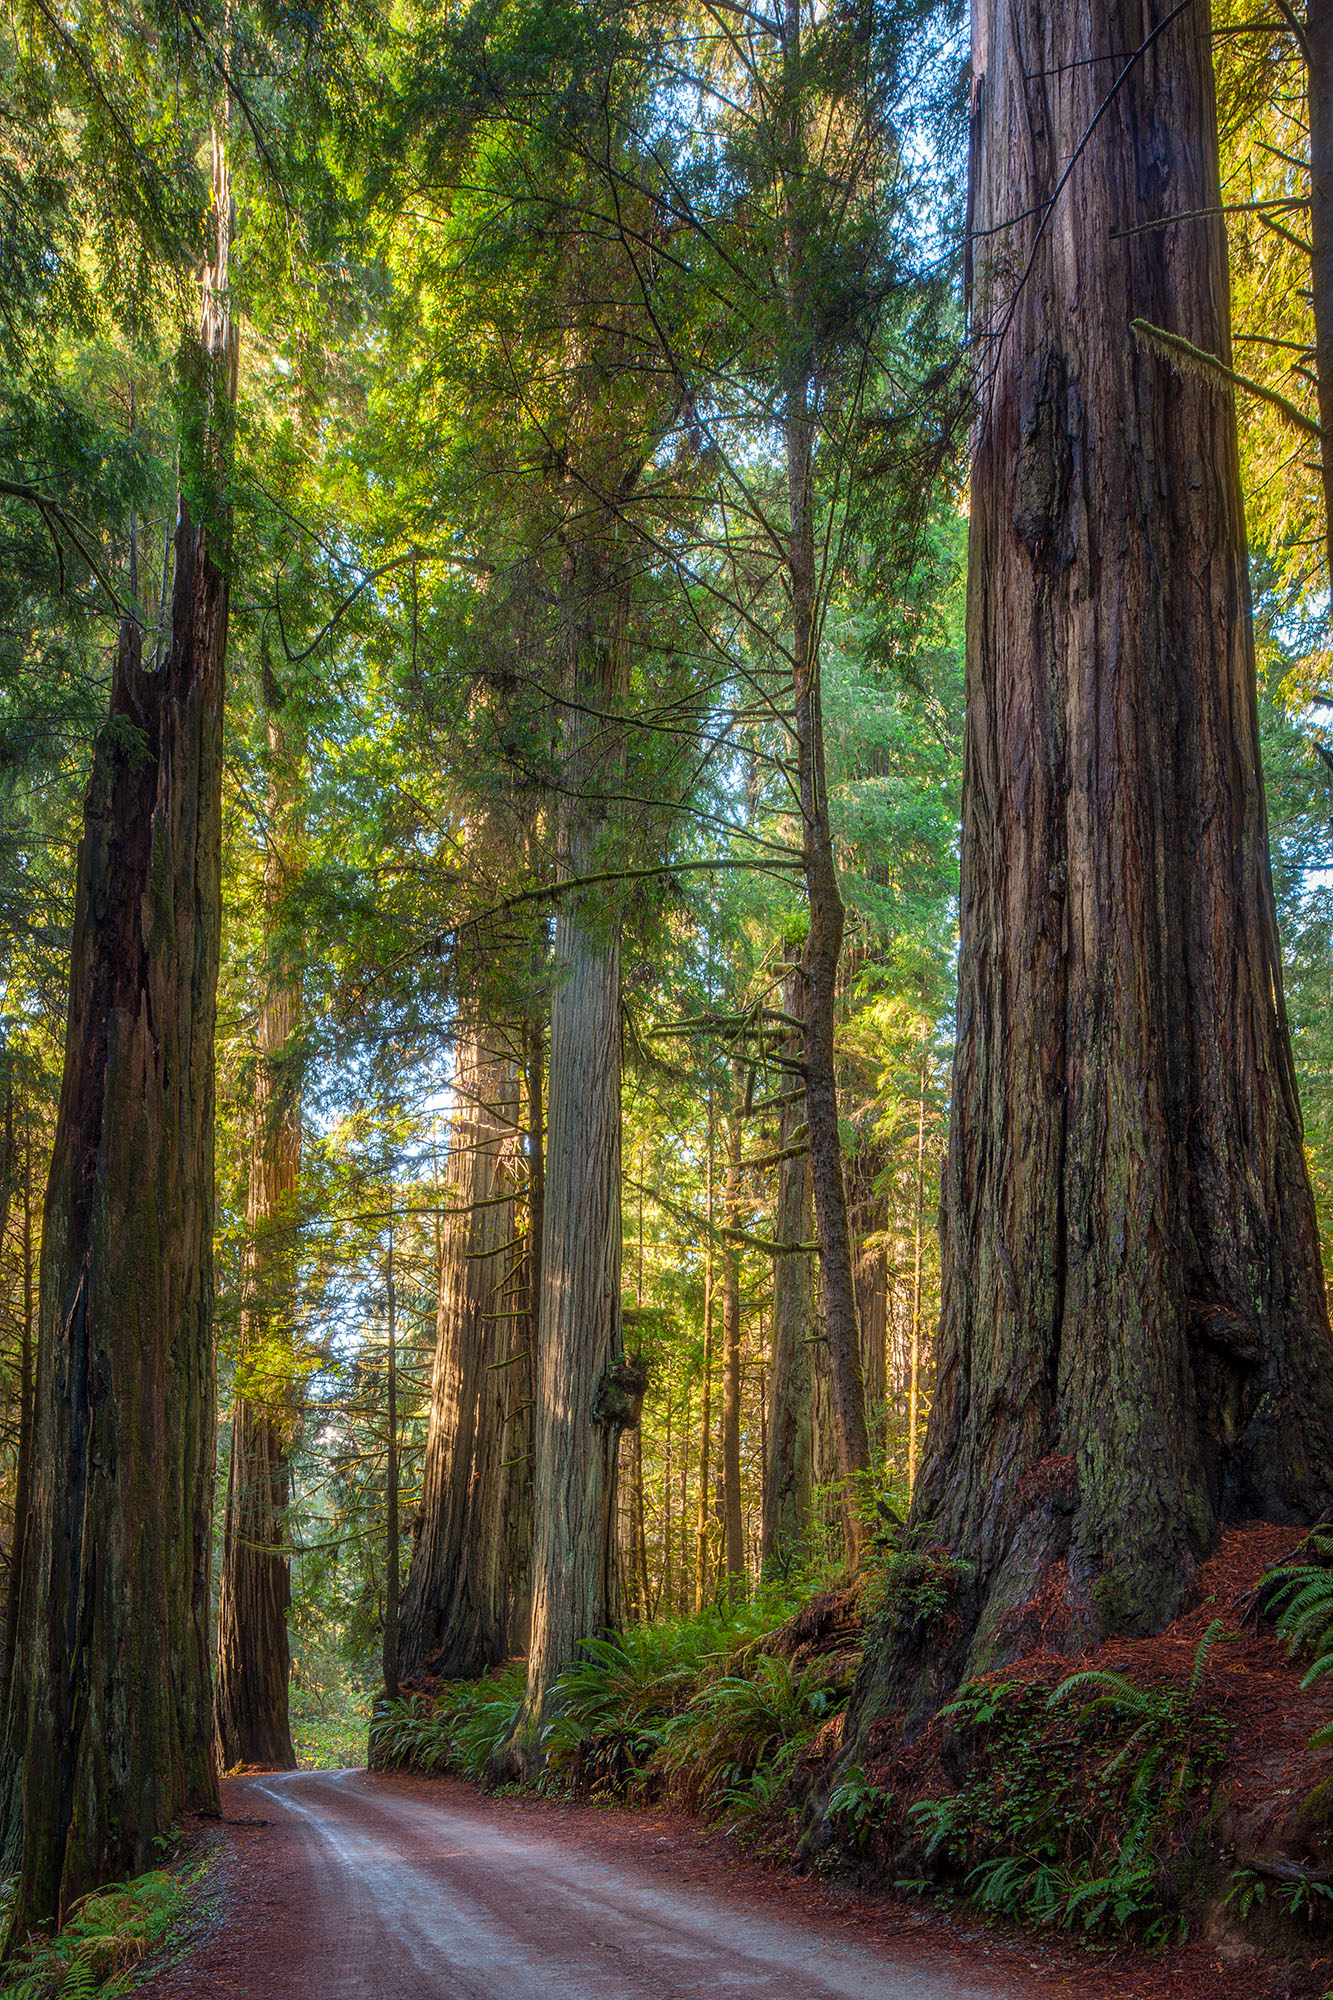 This vertical image, captured along Howland Hill Road in Jedediah Smith Redwoods State Park, California, reveals an awe-inspiring...